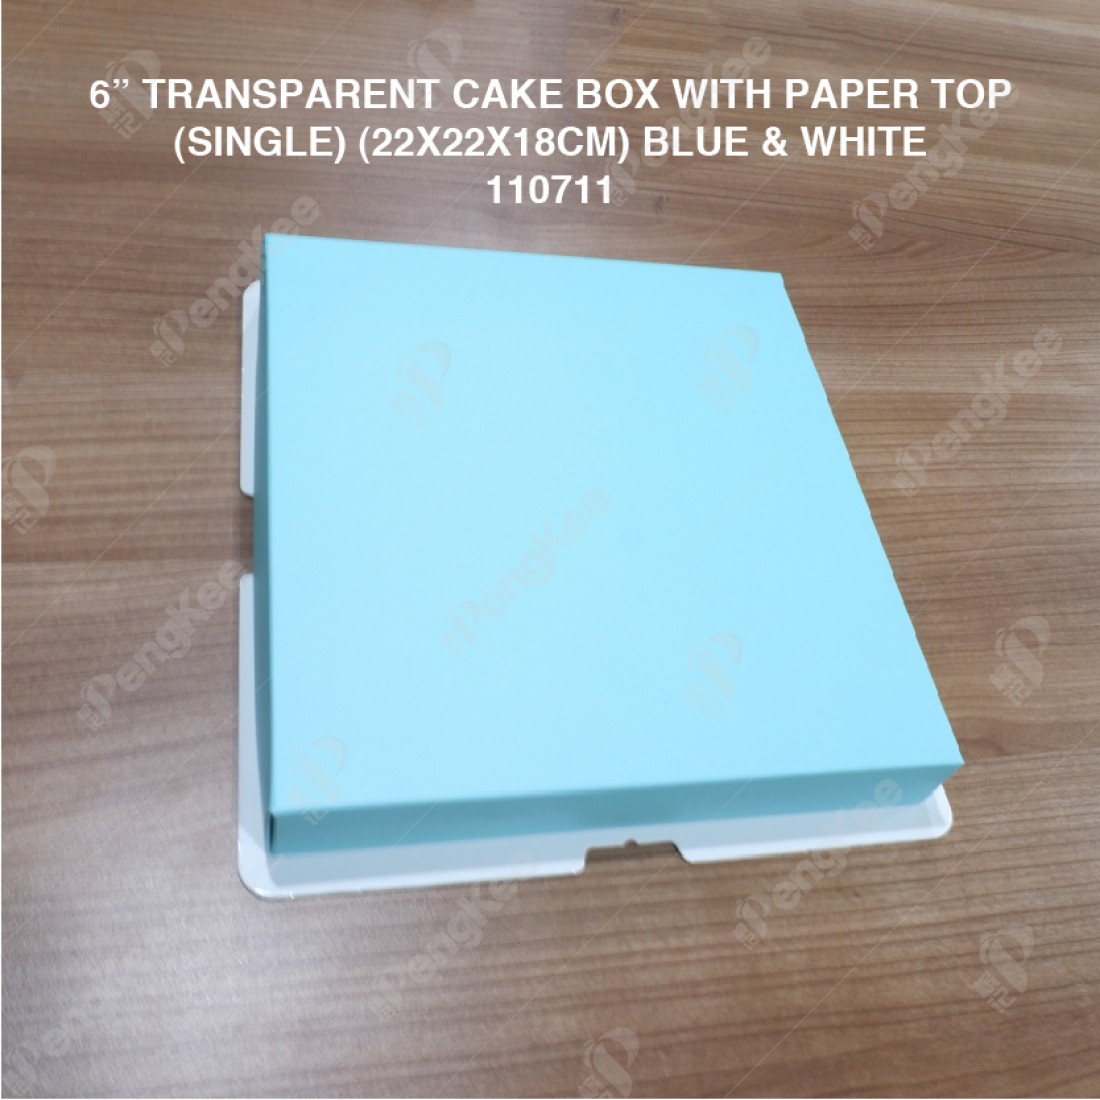 6" TRANSPARENT CAKE BOX WITH PAPER TOP(SINGLE) (22*22*18CM)- BLUE & WHITE